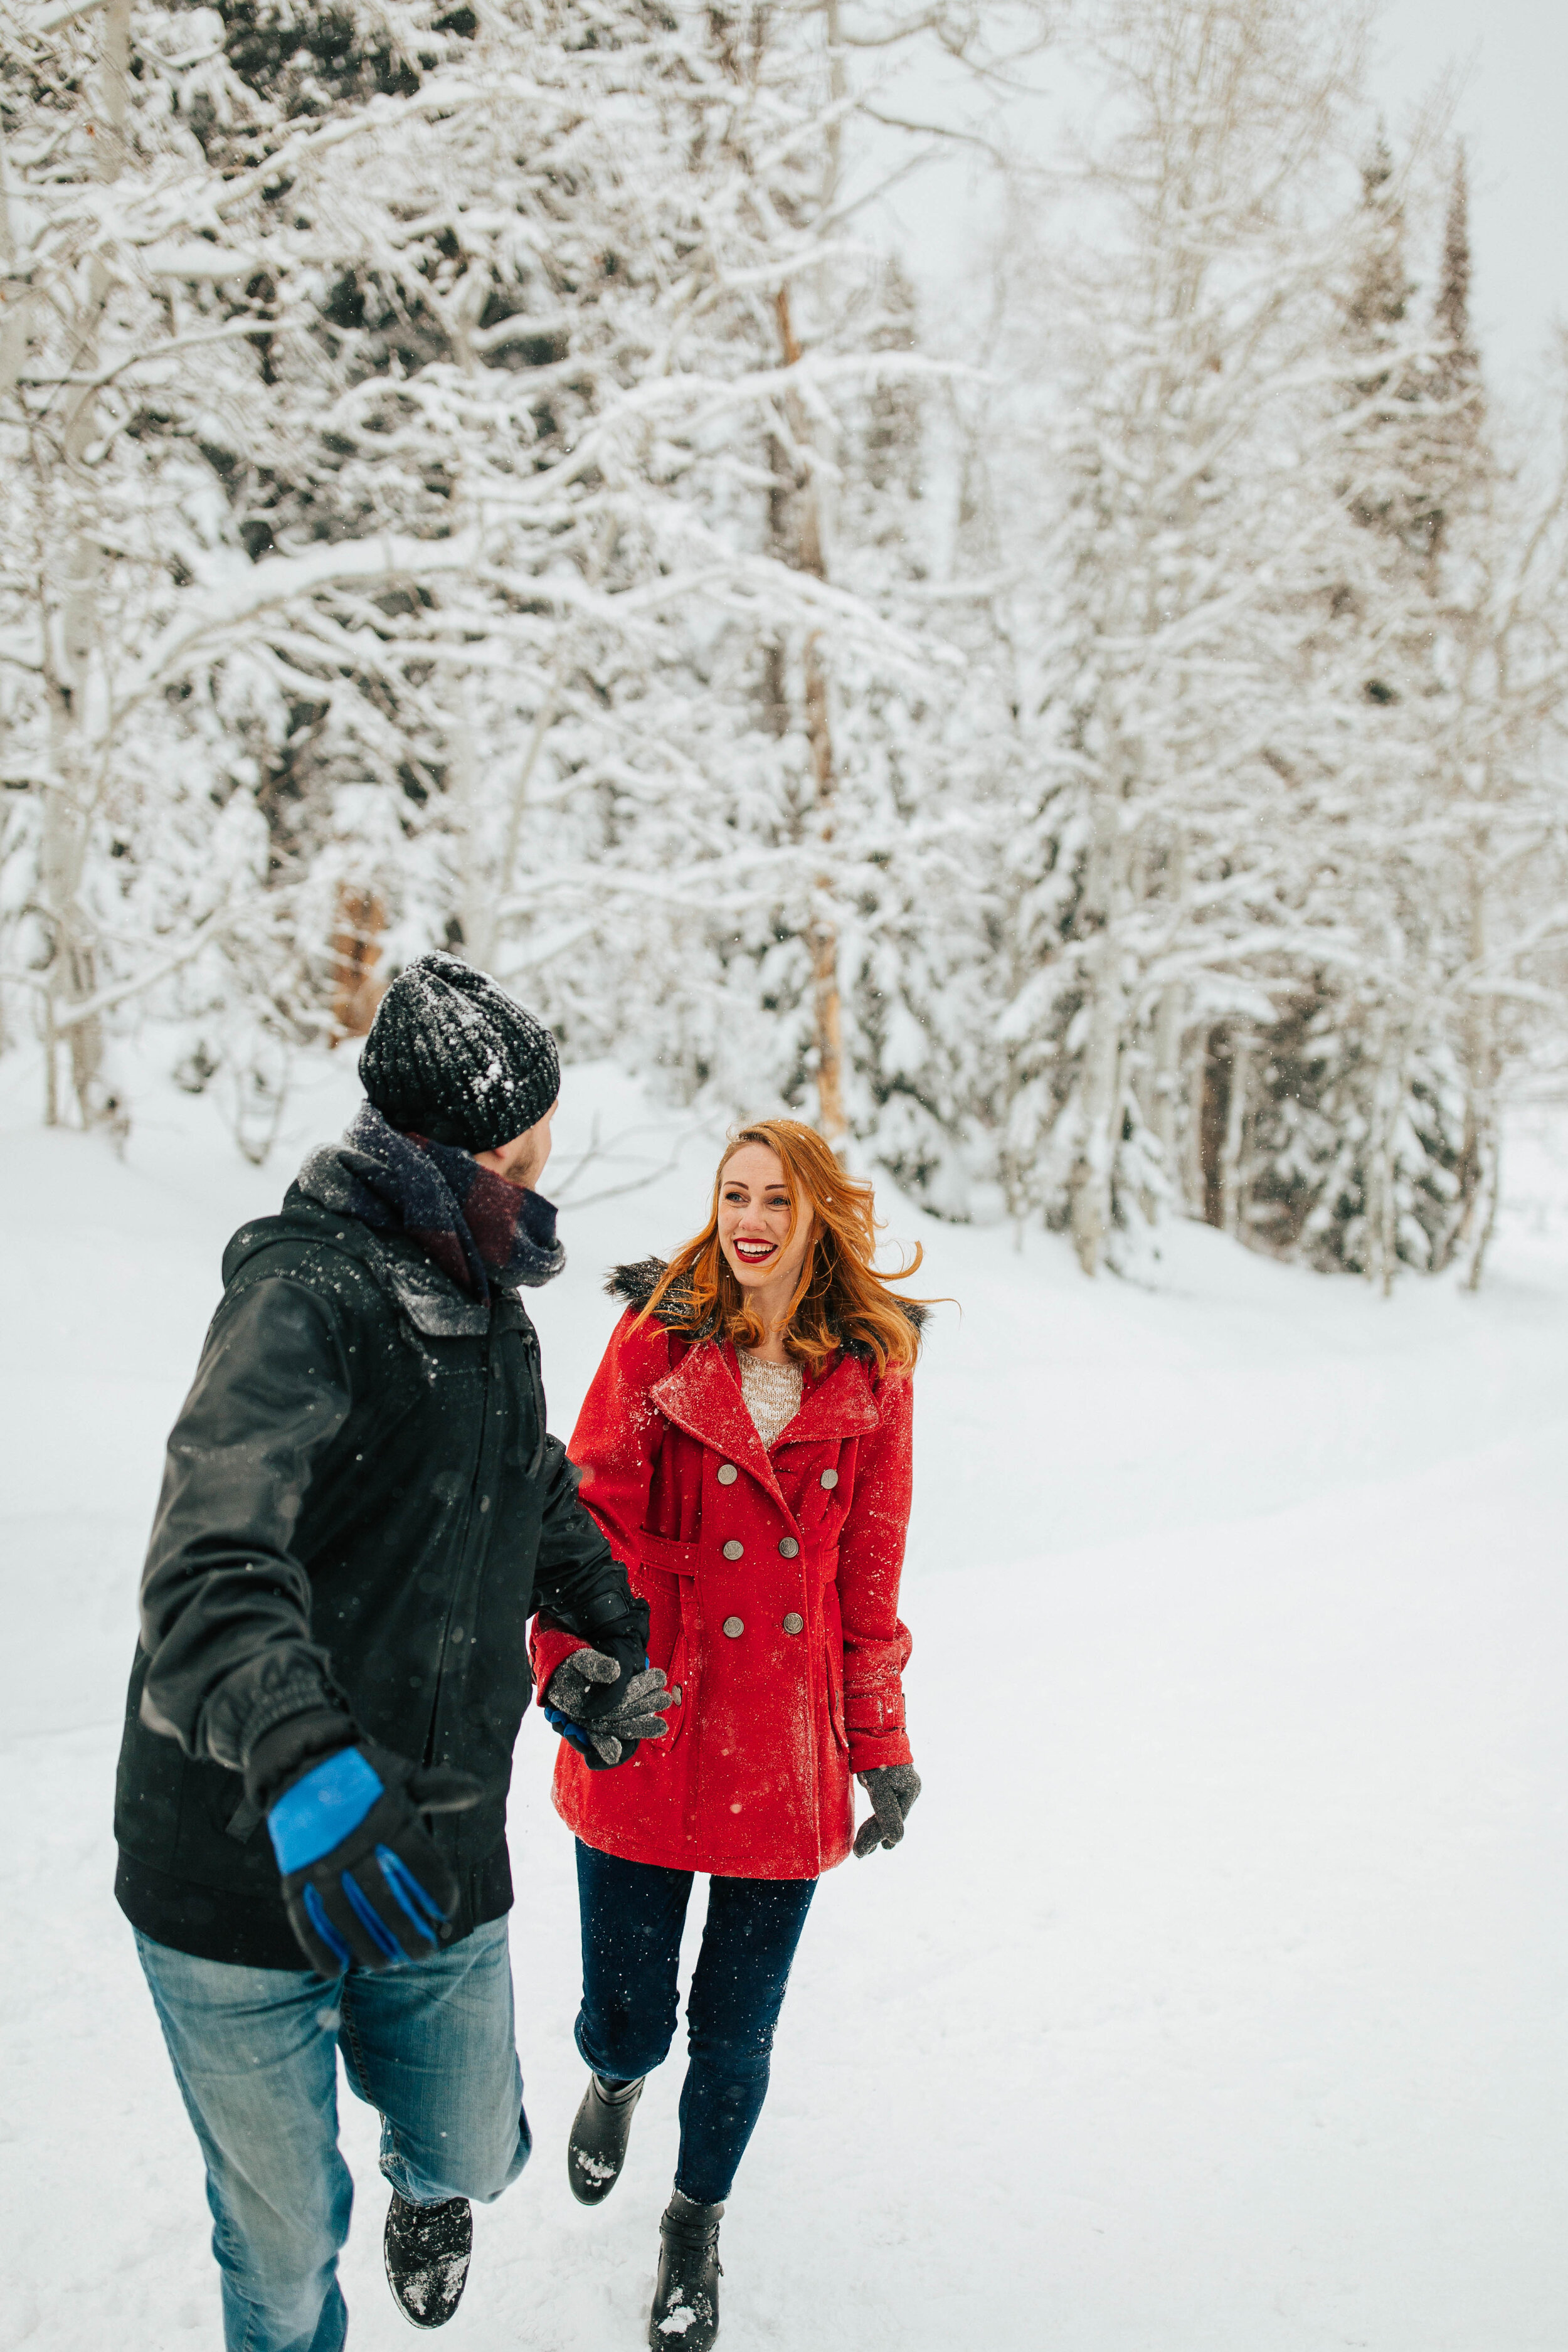 Winter couples session engagements snow mountains cozy wrapped in blanket #coupleshoot #utahphotographer #weddingphotographer #engagementsession #engagementshoot running playing in snow